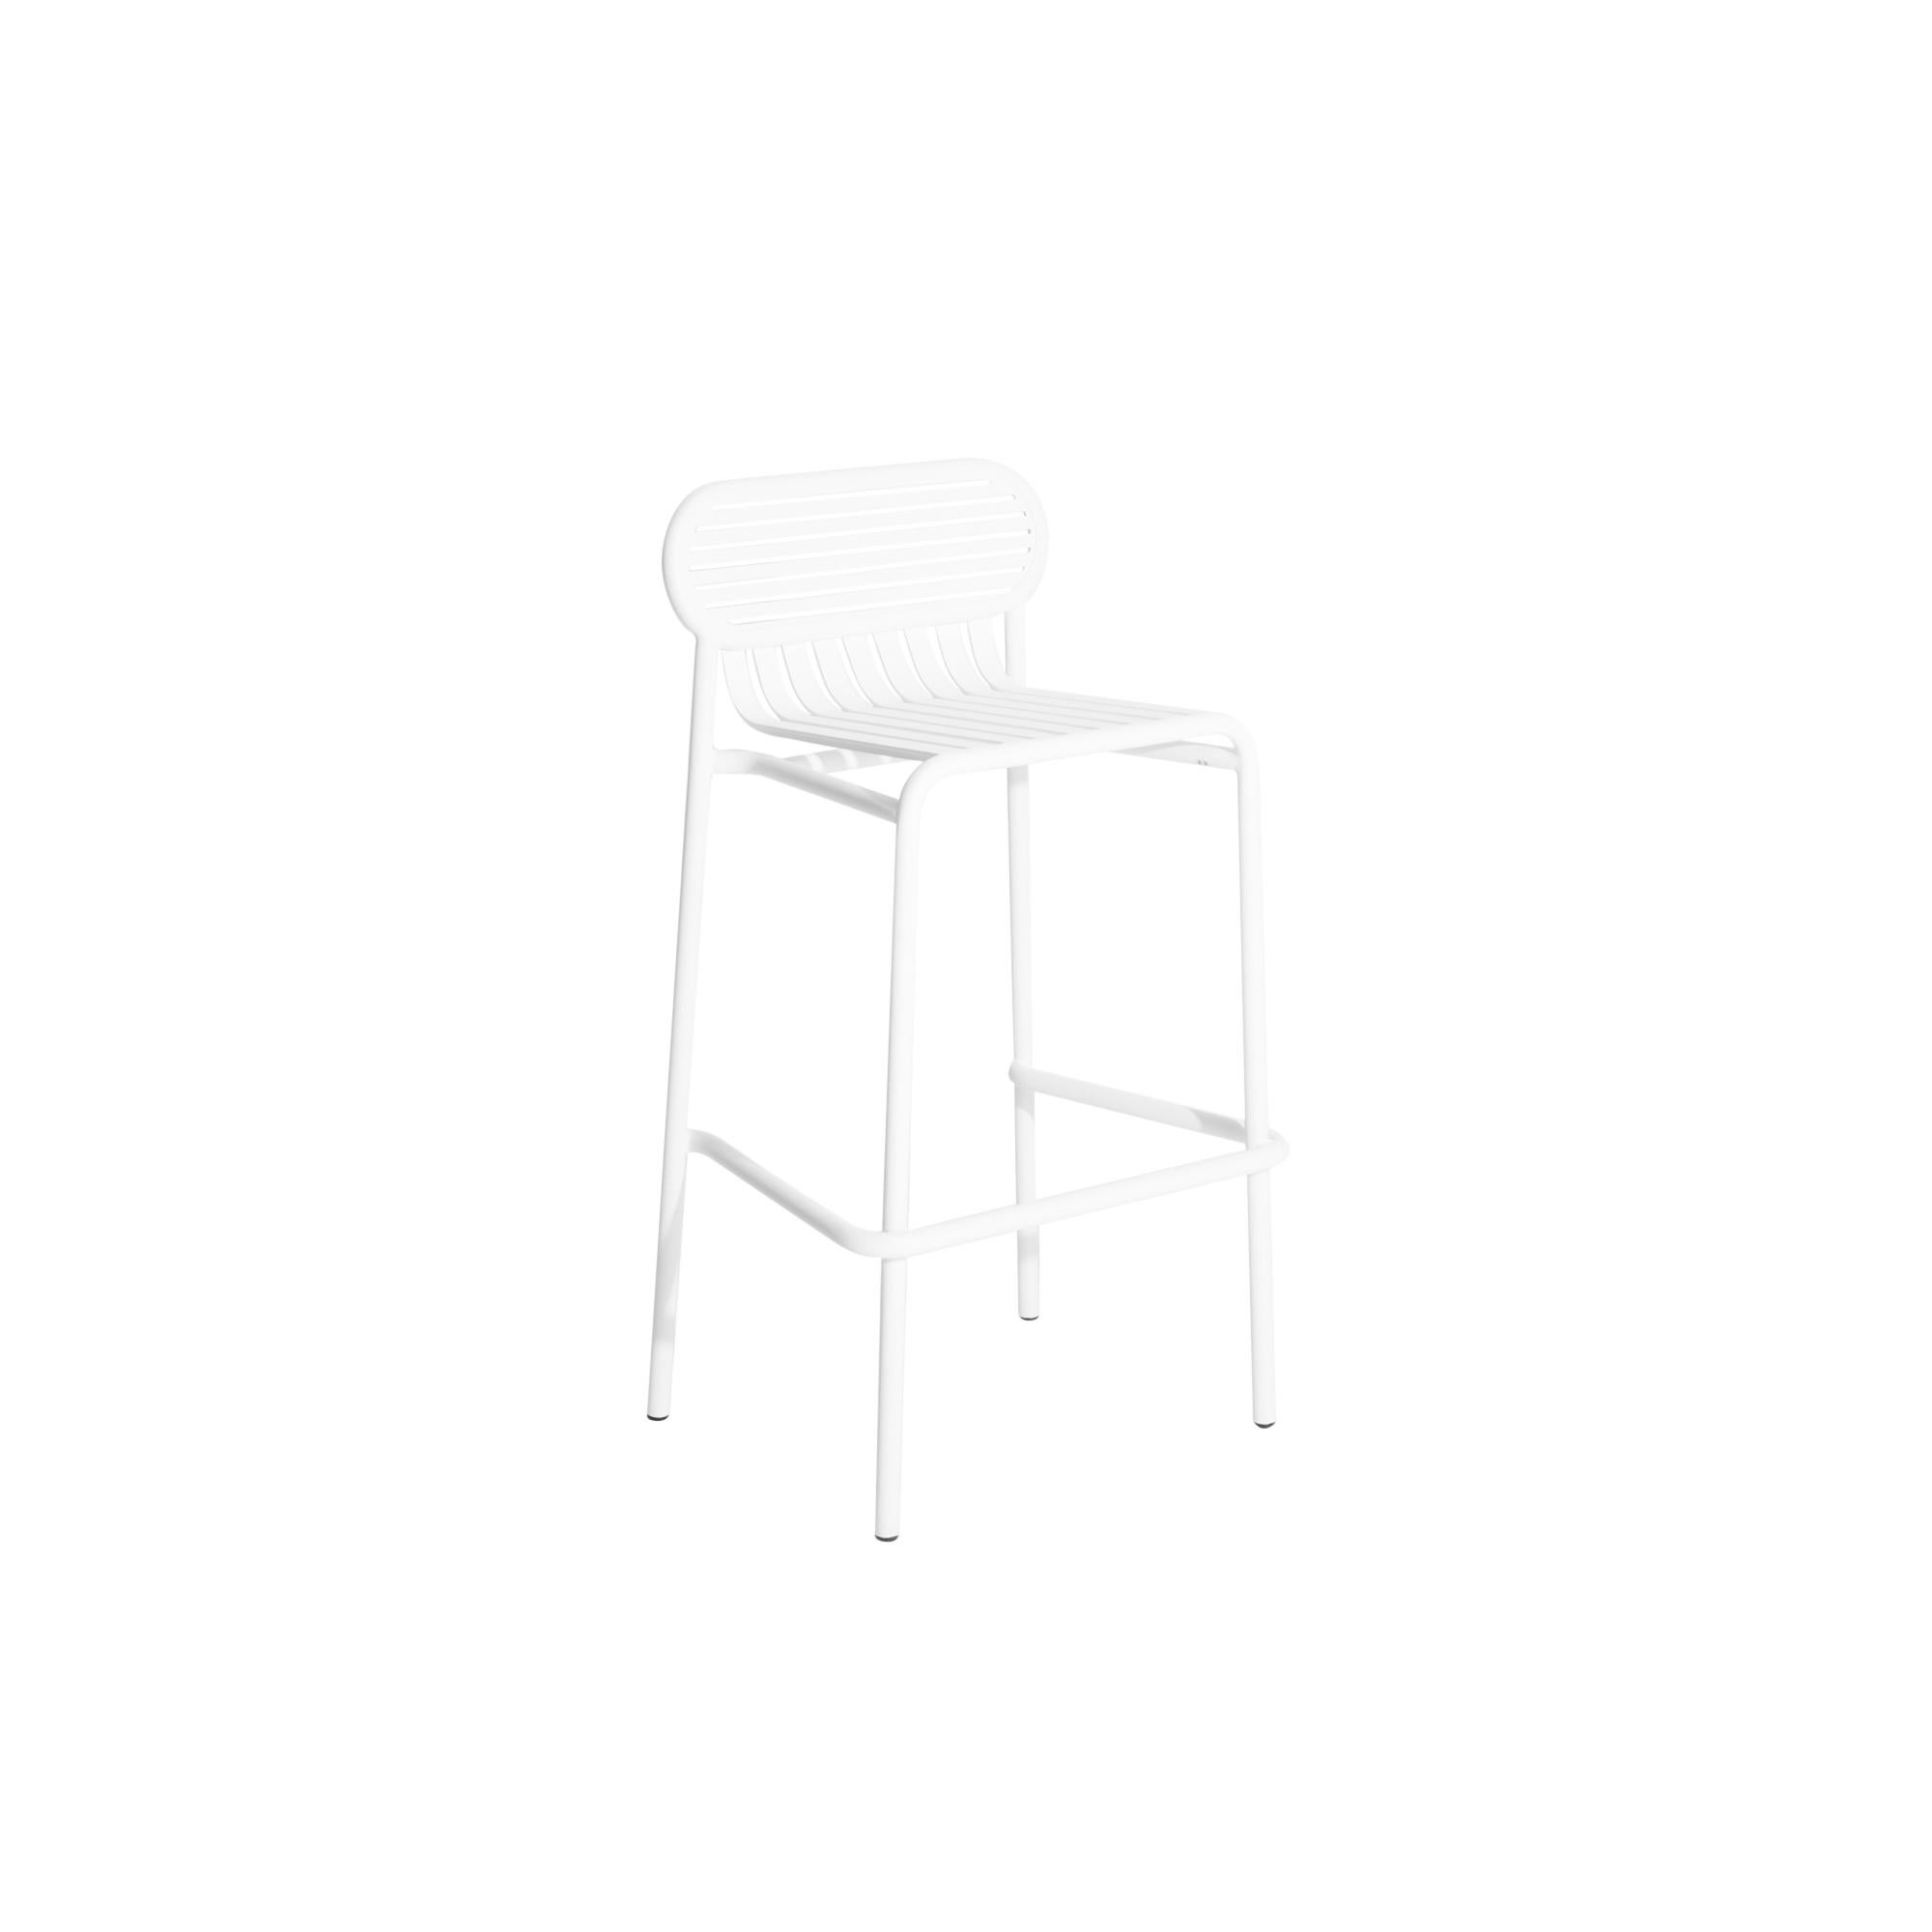 Petite Friture Week-End Bar Stool in White Aluminium by Studio BrichetZiegler, 2017

The week-end collection is a full range of outdoor furniture, in aluminium grained epoxy paint, matt finish, that includes 18 functions and 8 colours for the